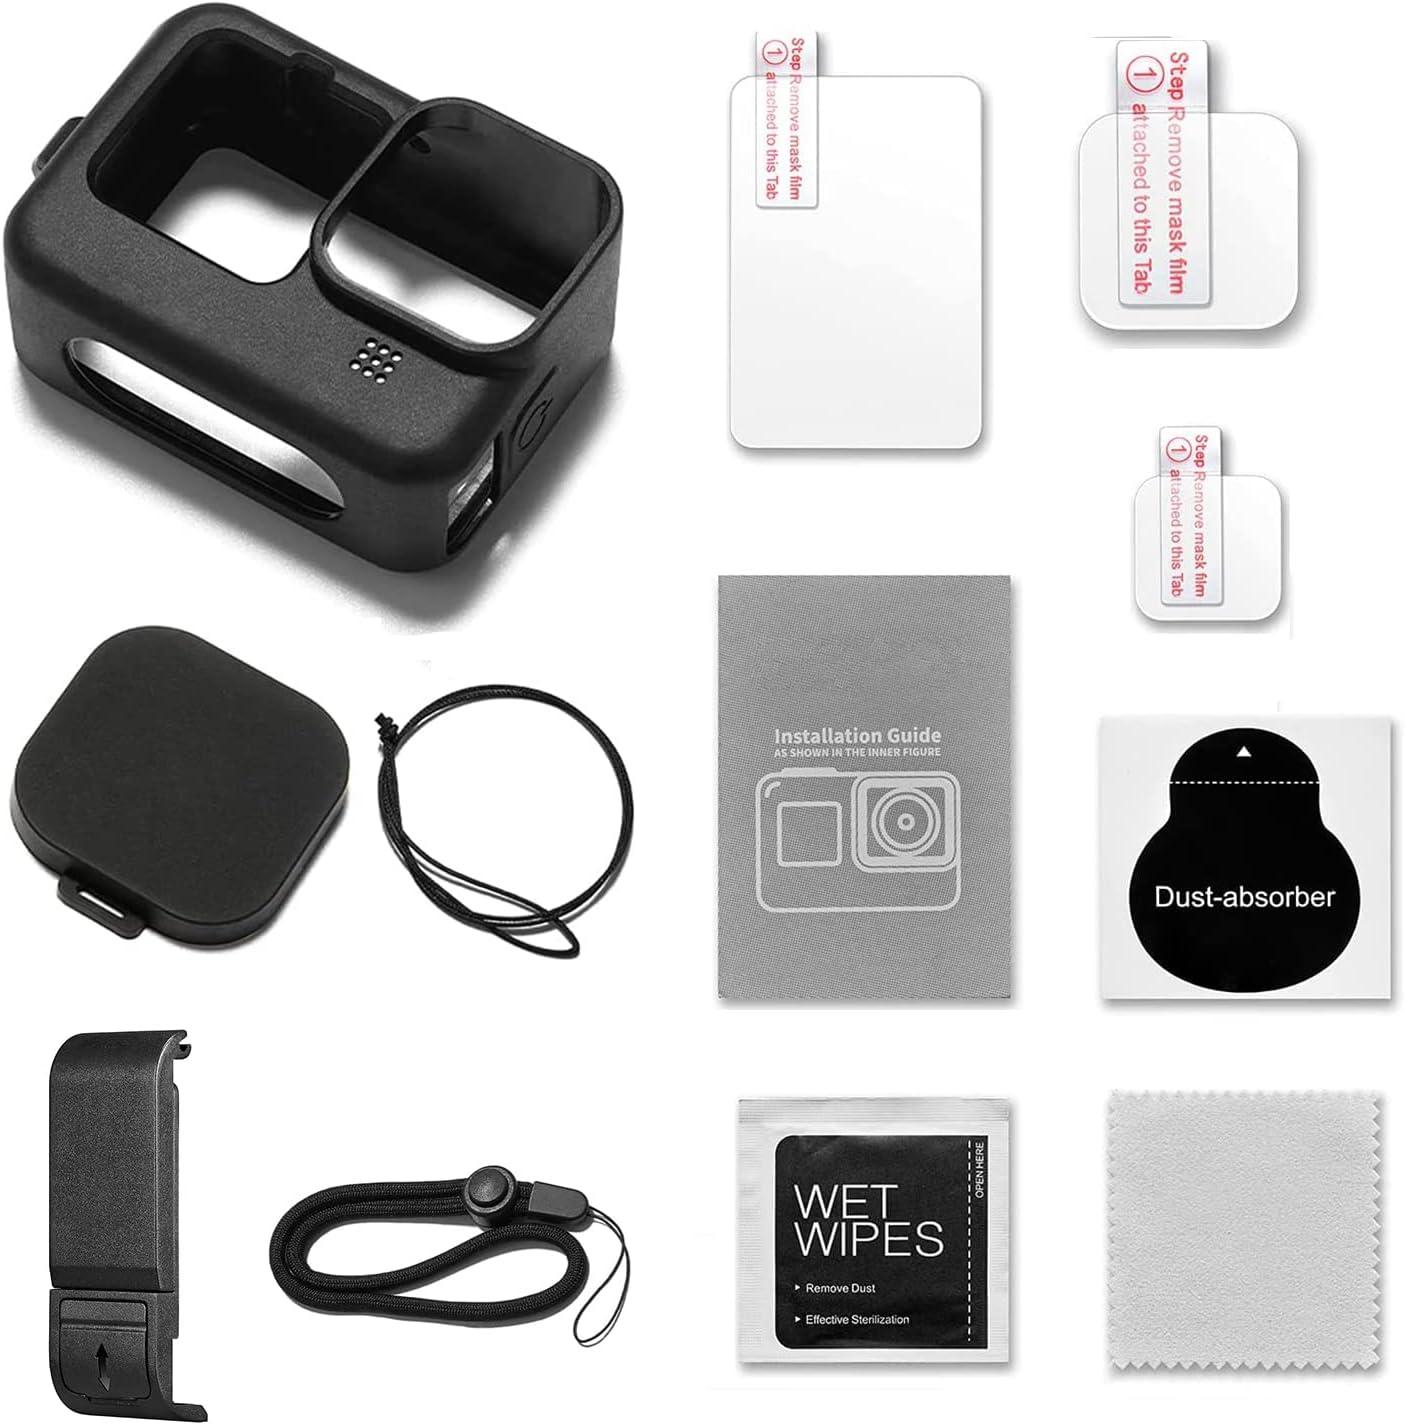 Which Accessories Will Work with GoPro HERO9 Black?